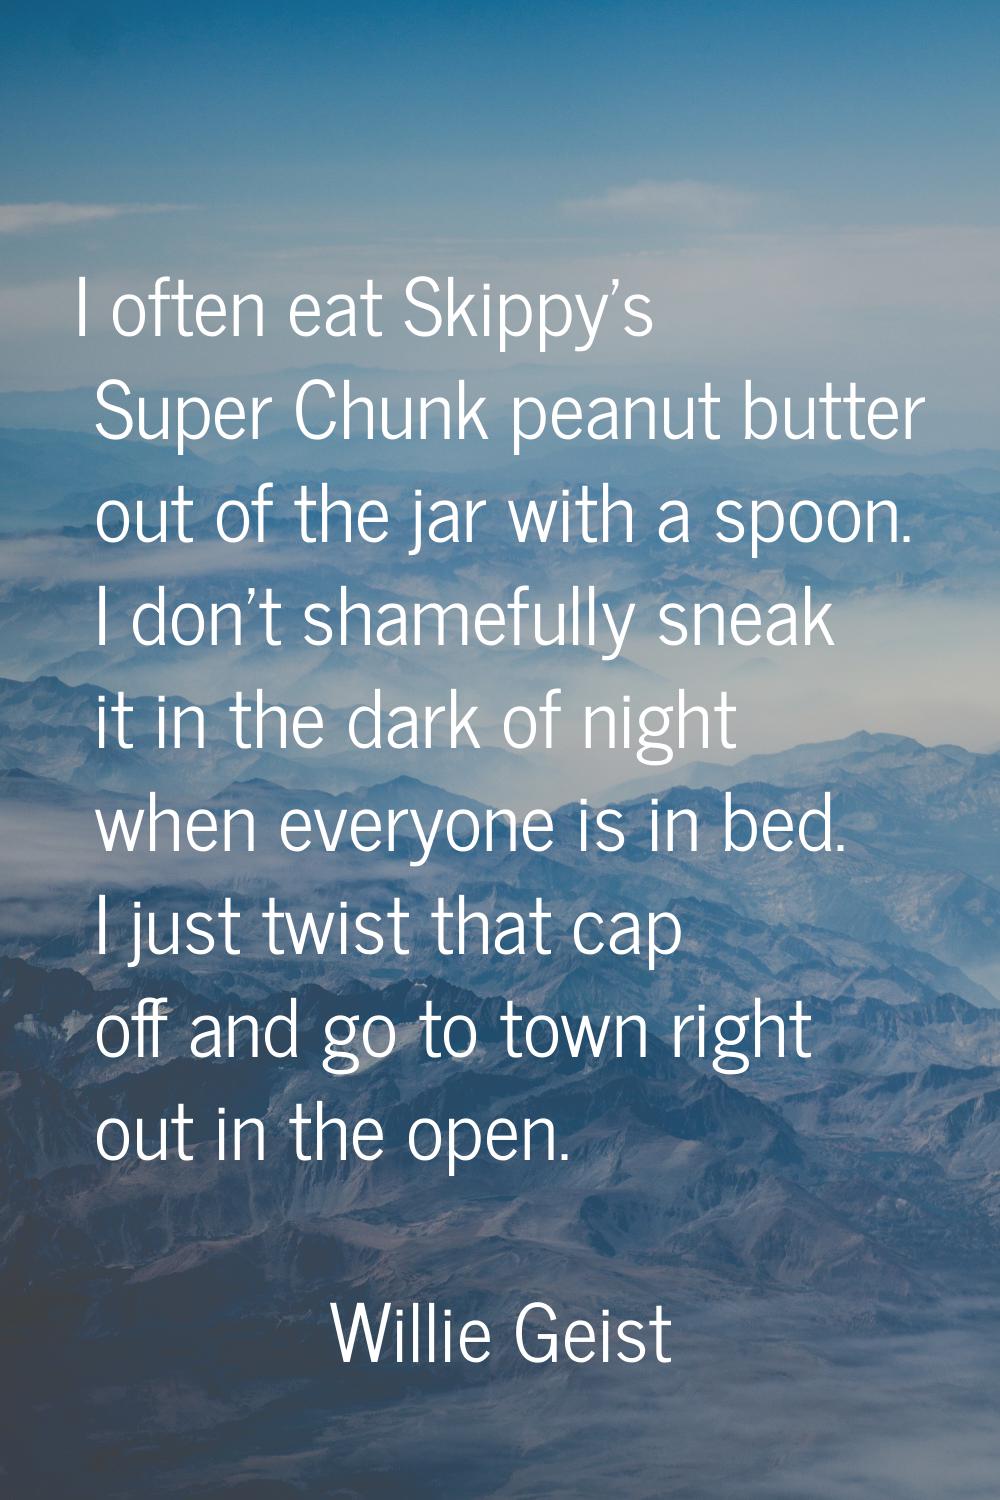 I often eat Skippy's Super Chunk peanut butter out of the jar with a spoon. I don't shamefully snea